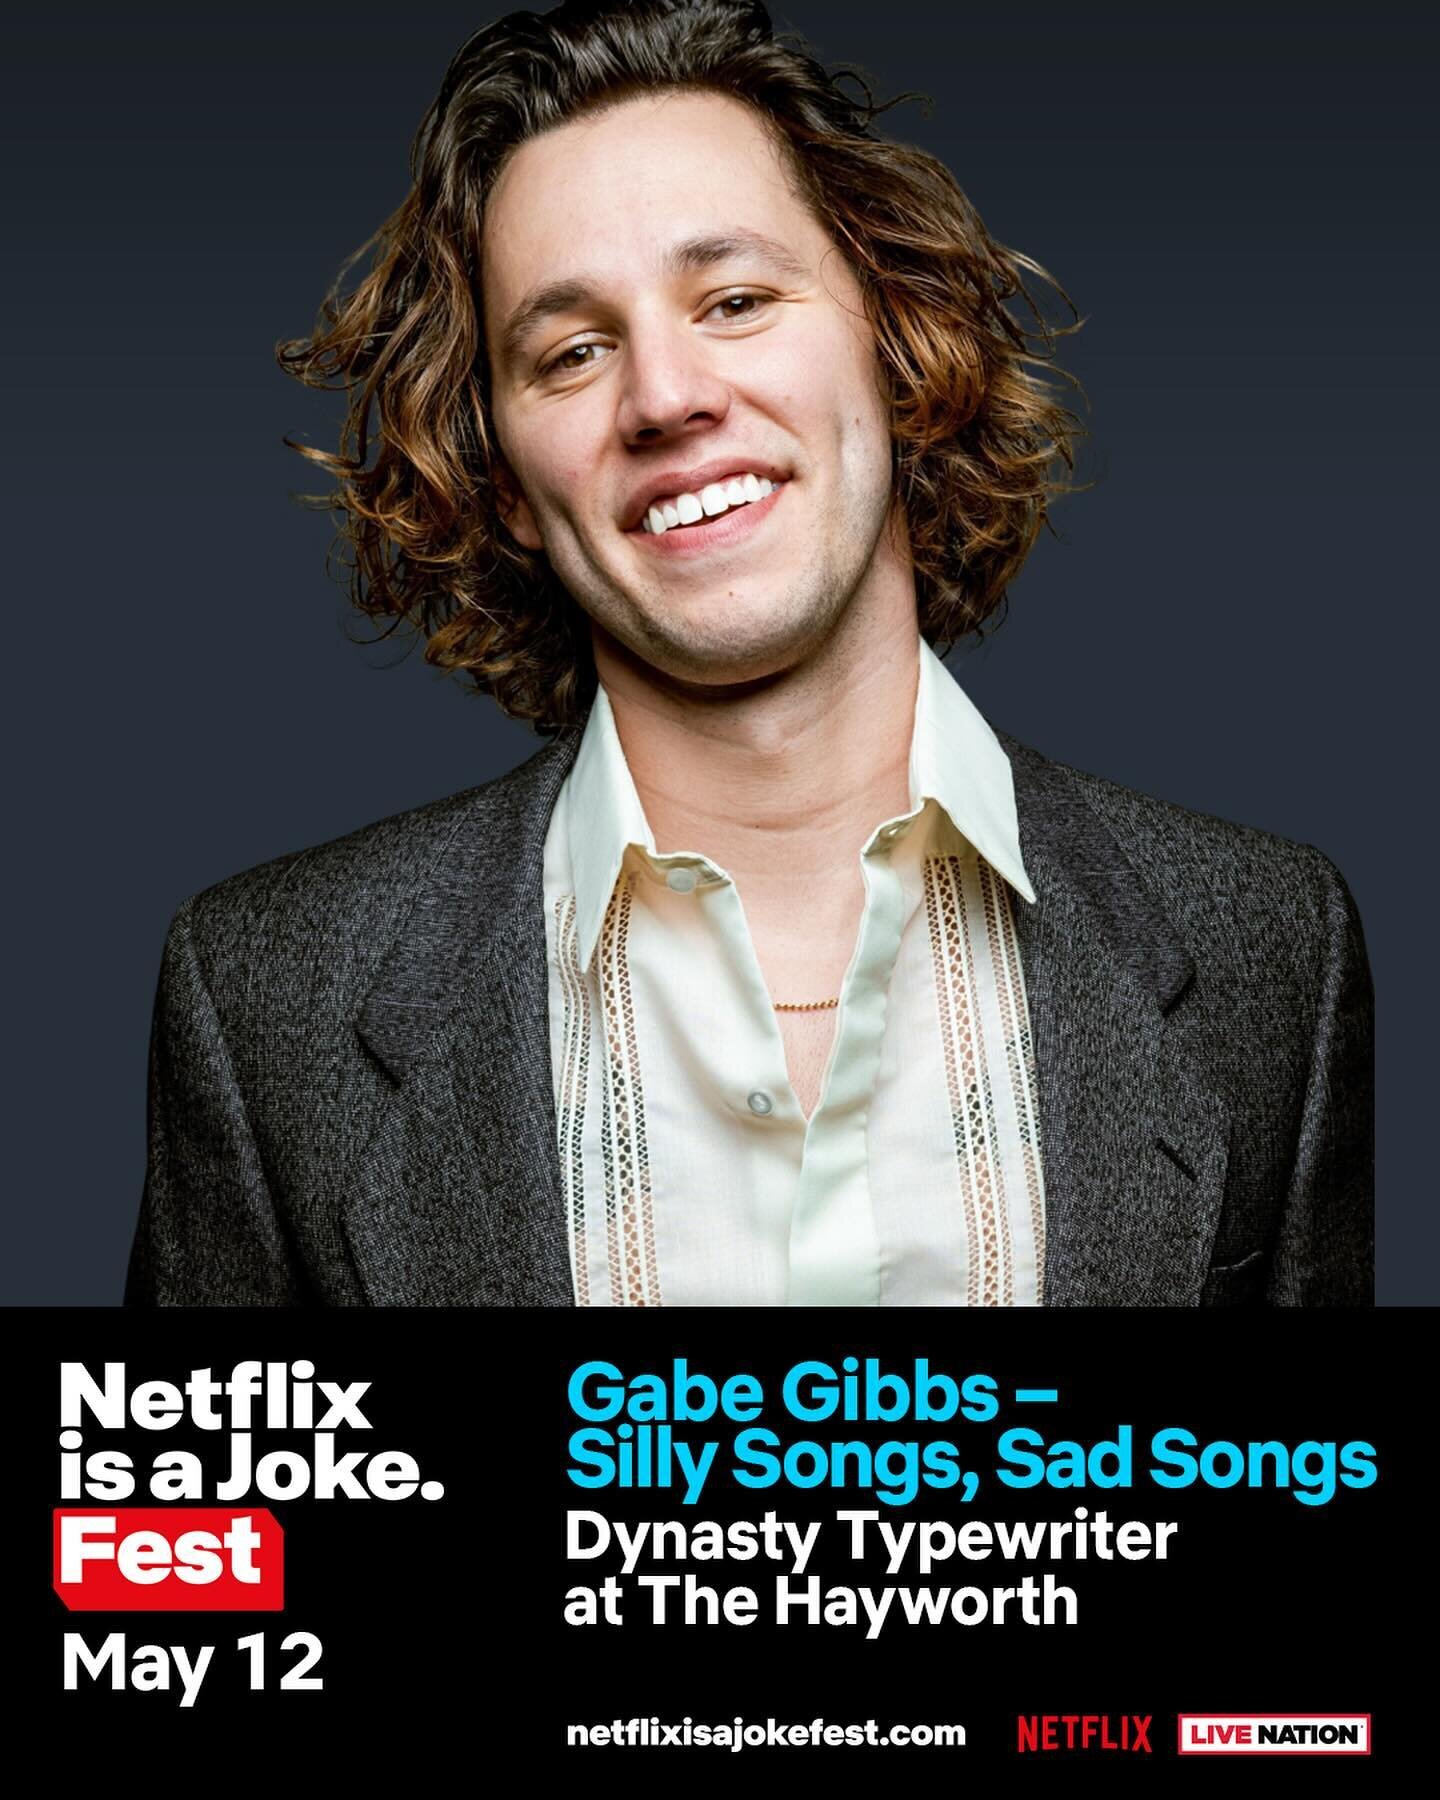 Yer boy will be a part of the @netflixisajoke fest this year! May 12 at @dynastytypewriter 🤘🏼
.
Tix are live. Link in bio. Use code GABE for access!
.
#comedy #netflixisajoke